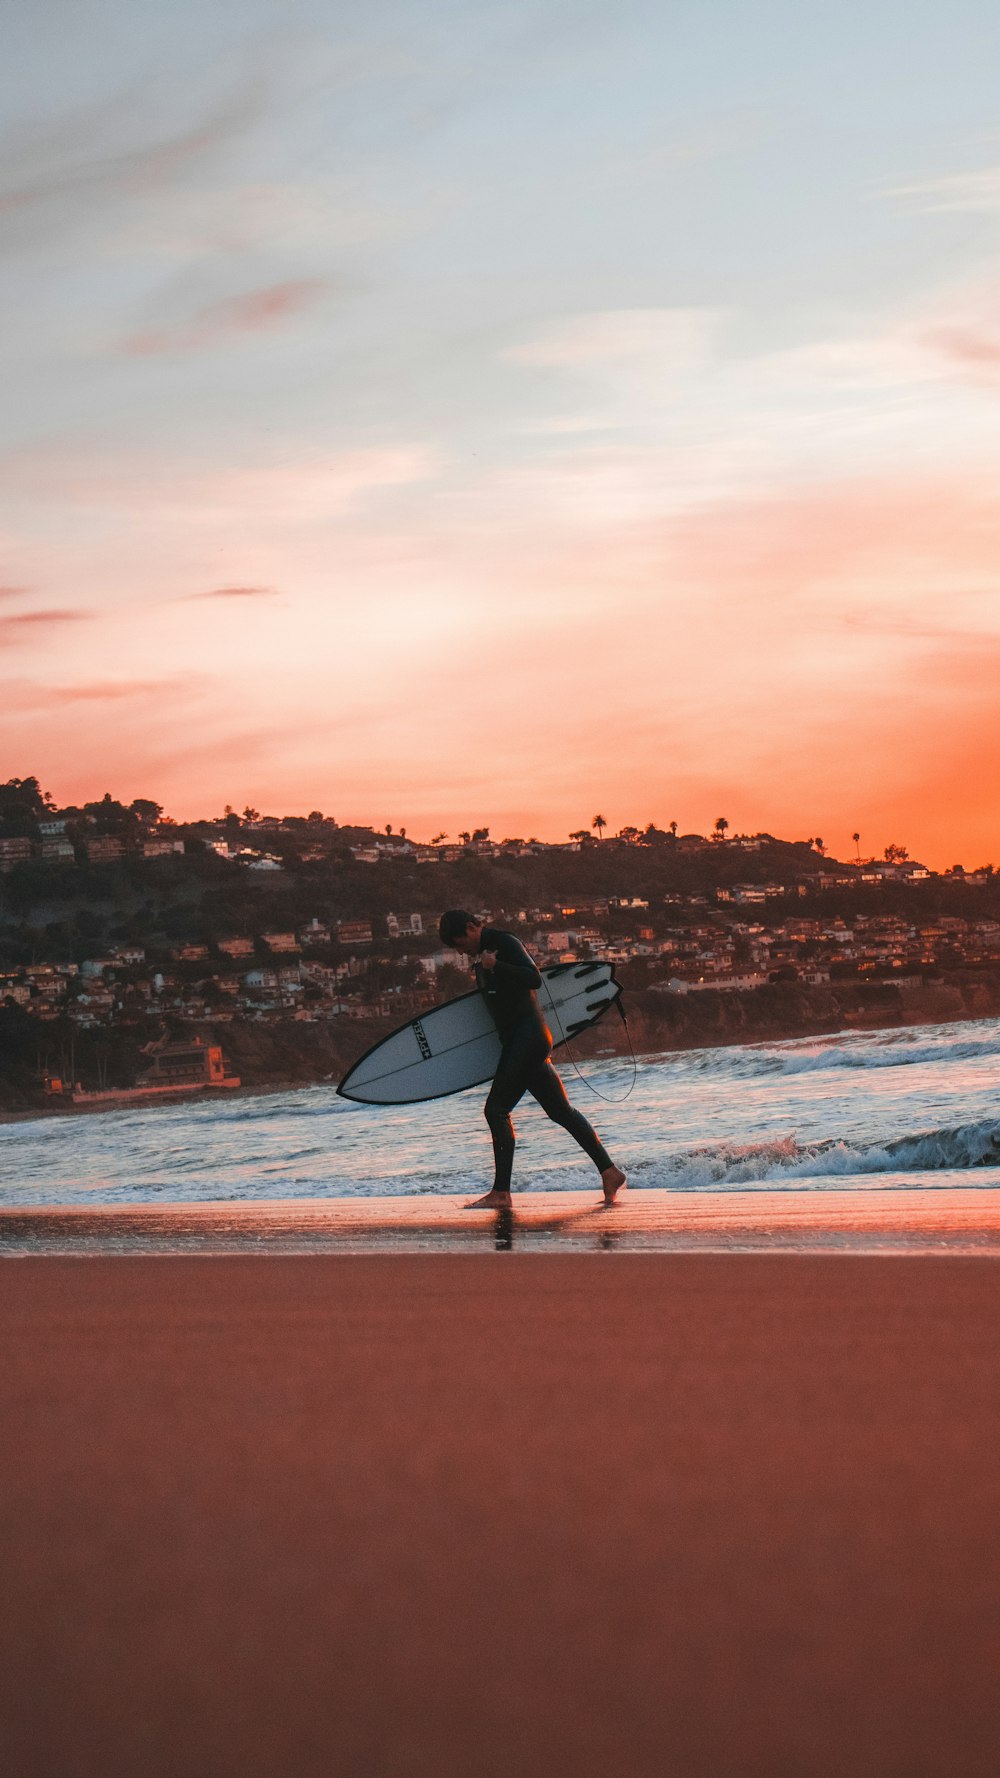 man in black wet suit holding white surfboard walking on beach during sunset